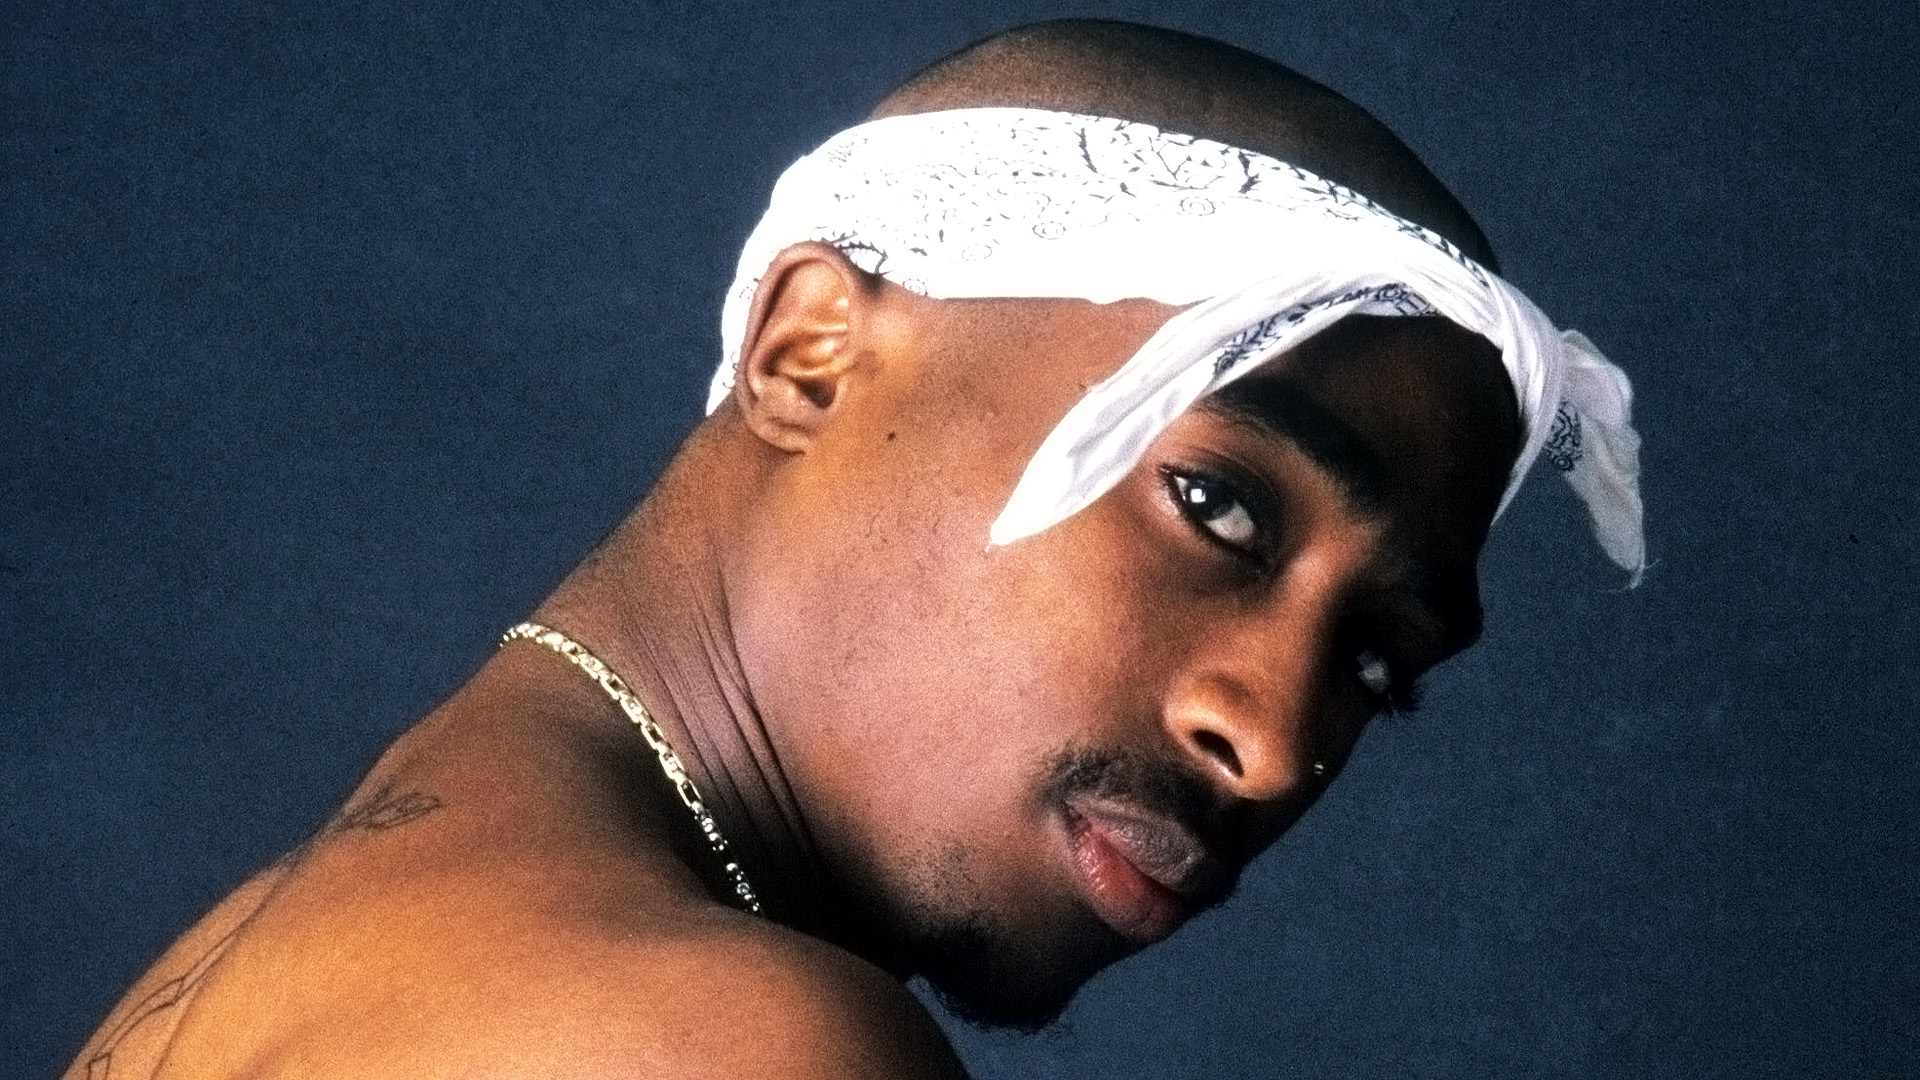 Love 2pac And Everything Connected With Him I Ve Gotten So Deep